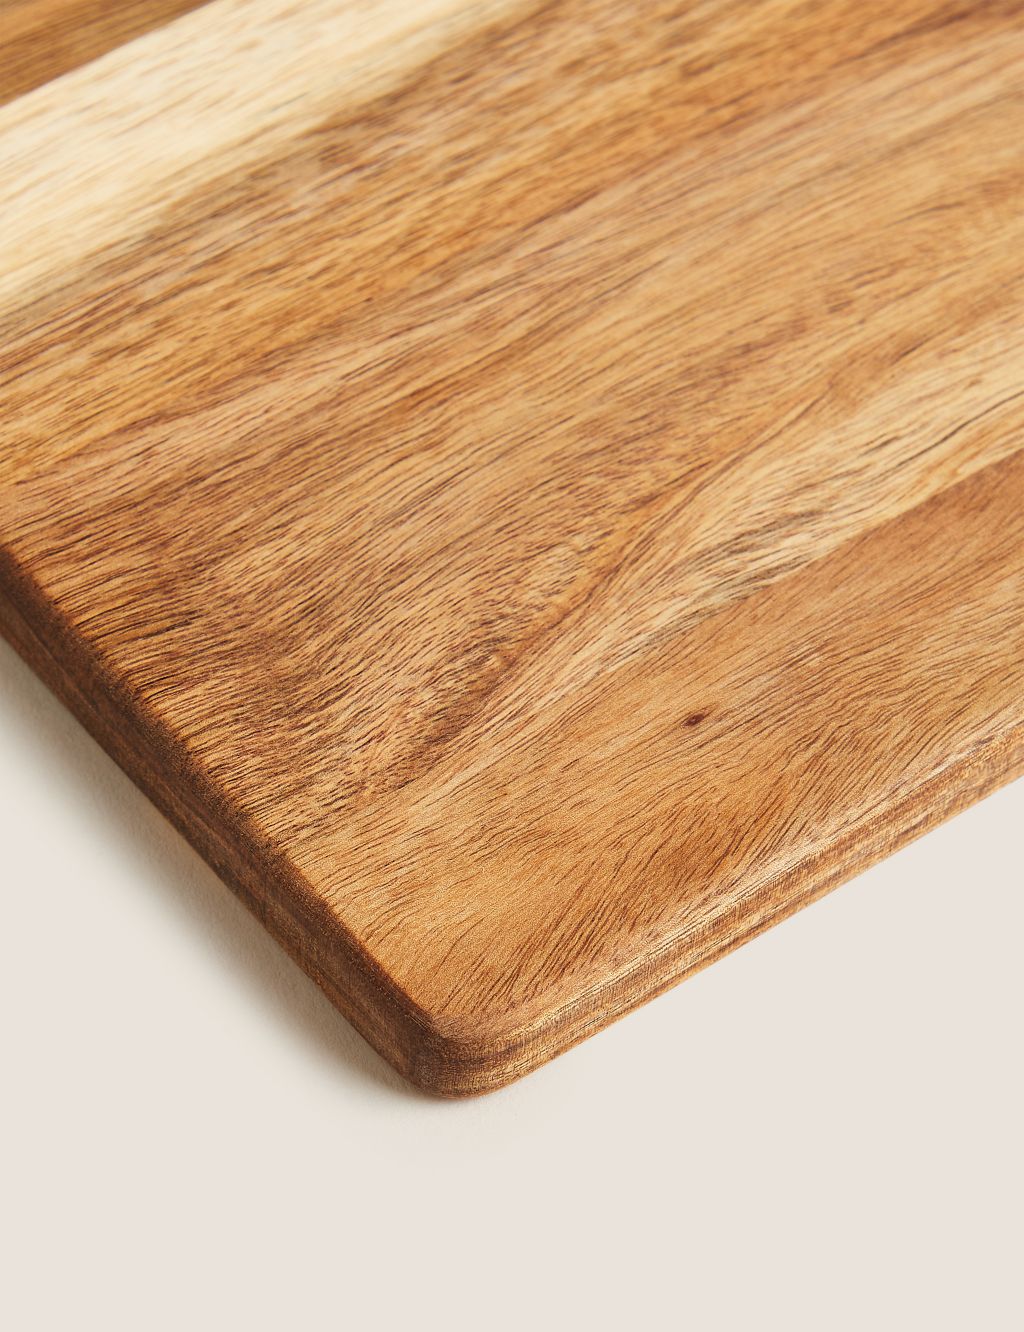 Large Wooden Chopping Board image 2